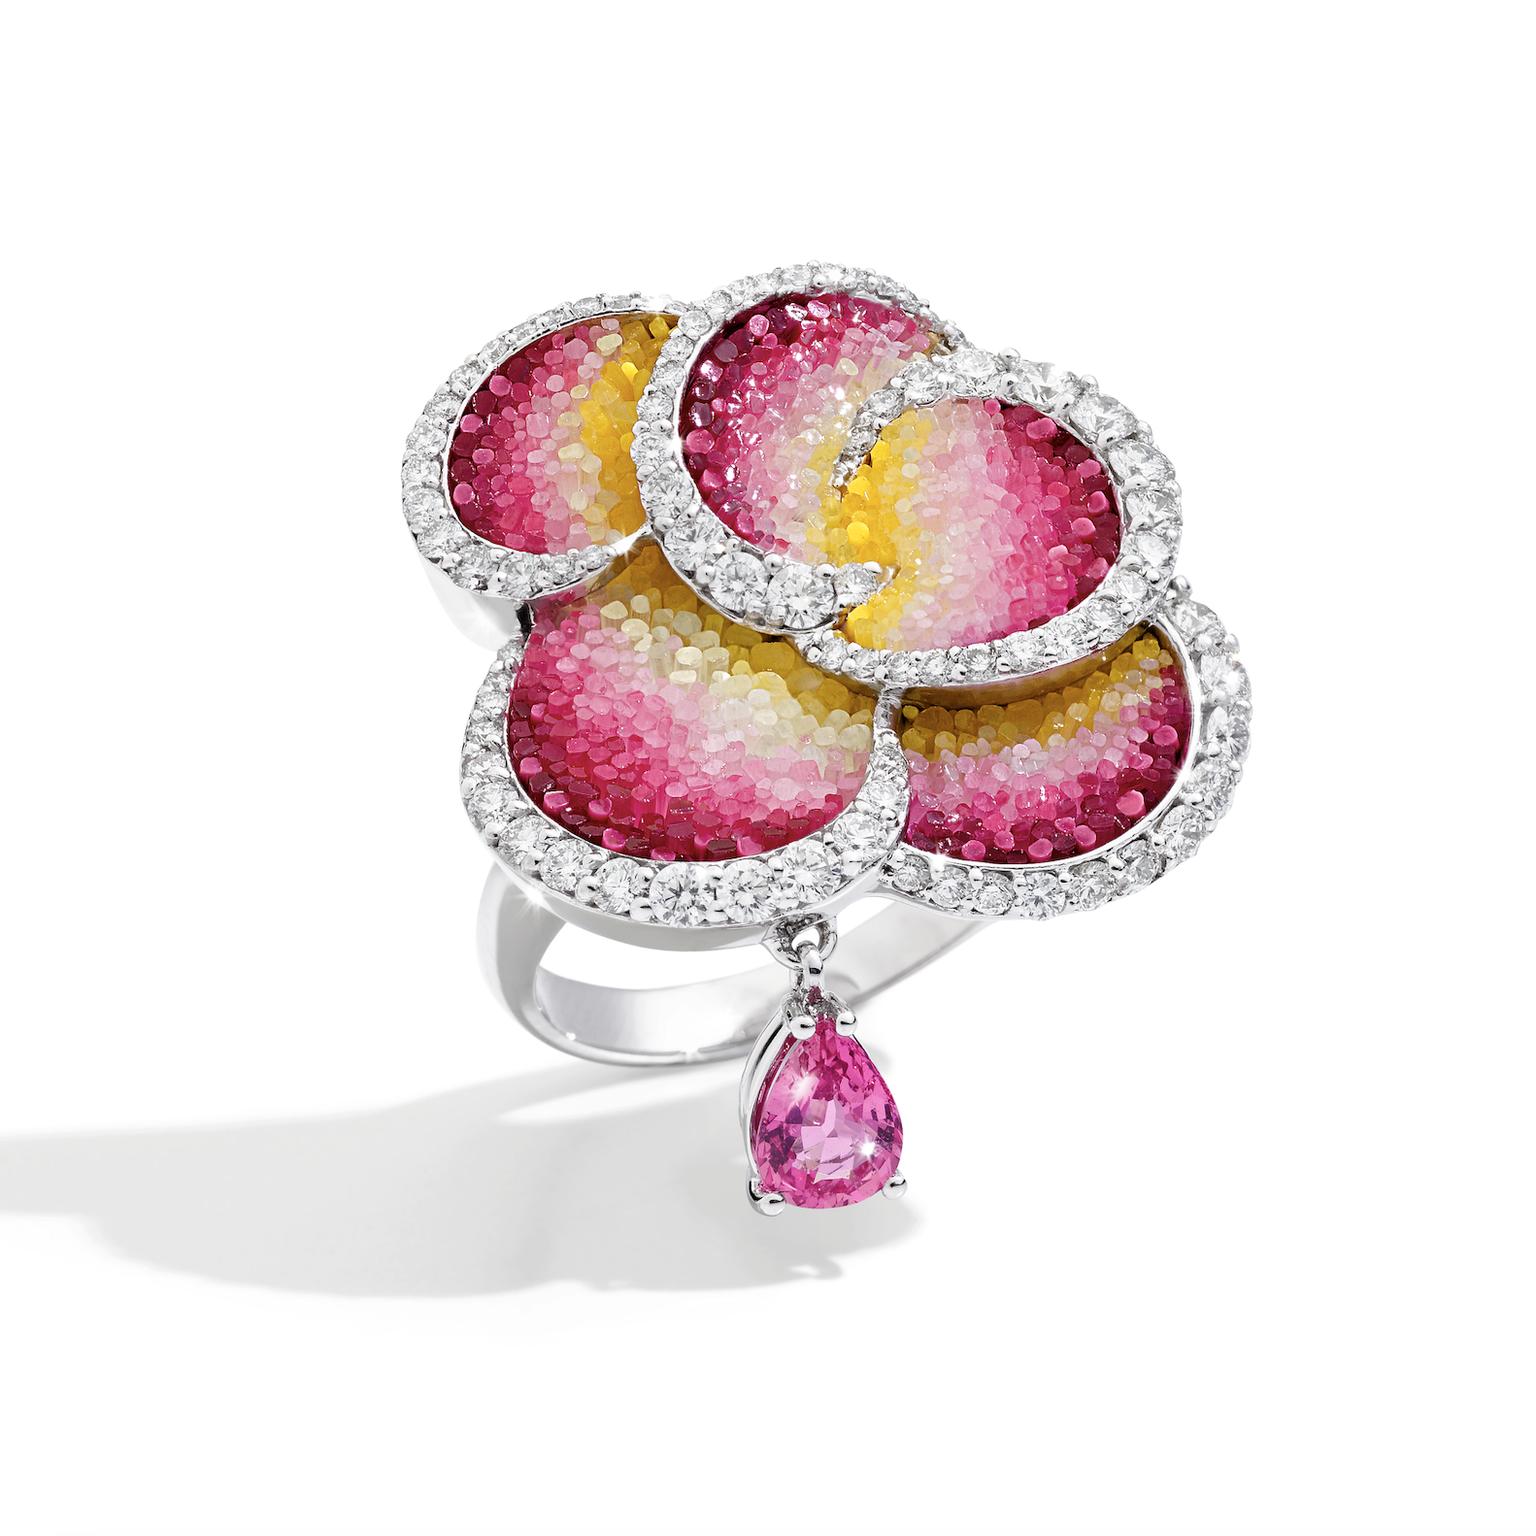 Pink Gioia Rose Carpet ring by Sicis